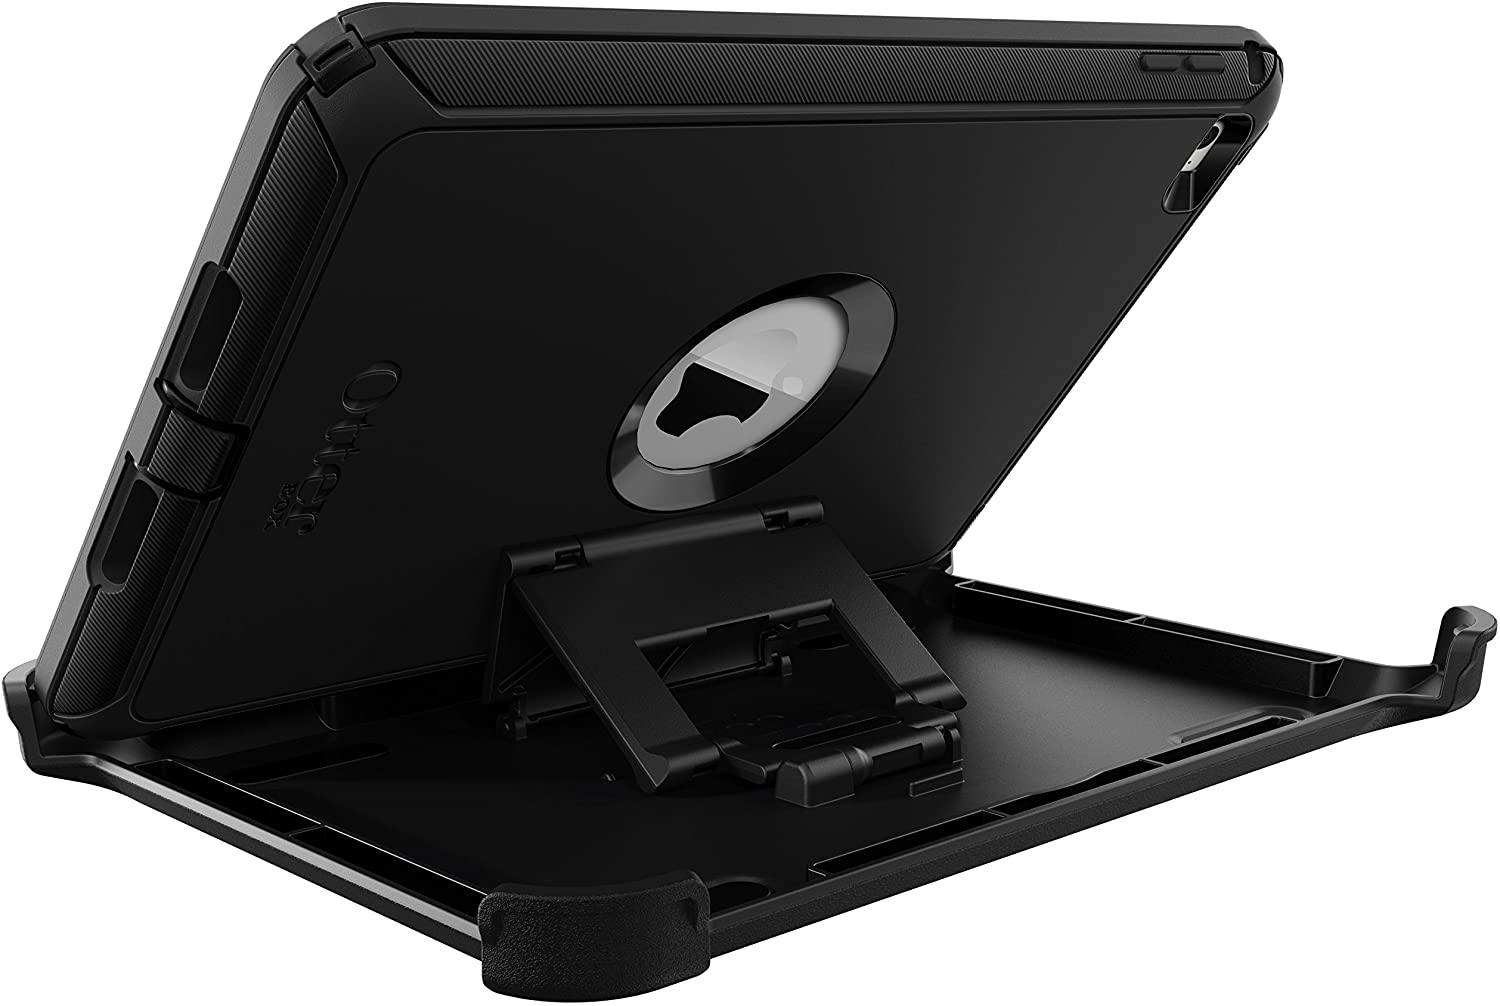 OtterBox DEFENDER SERIES Case for iPad Air 2 - BLACK - e4cents